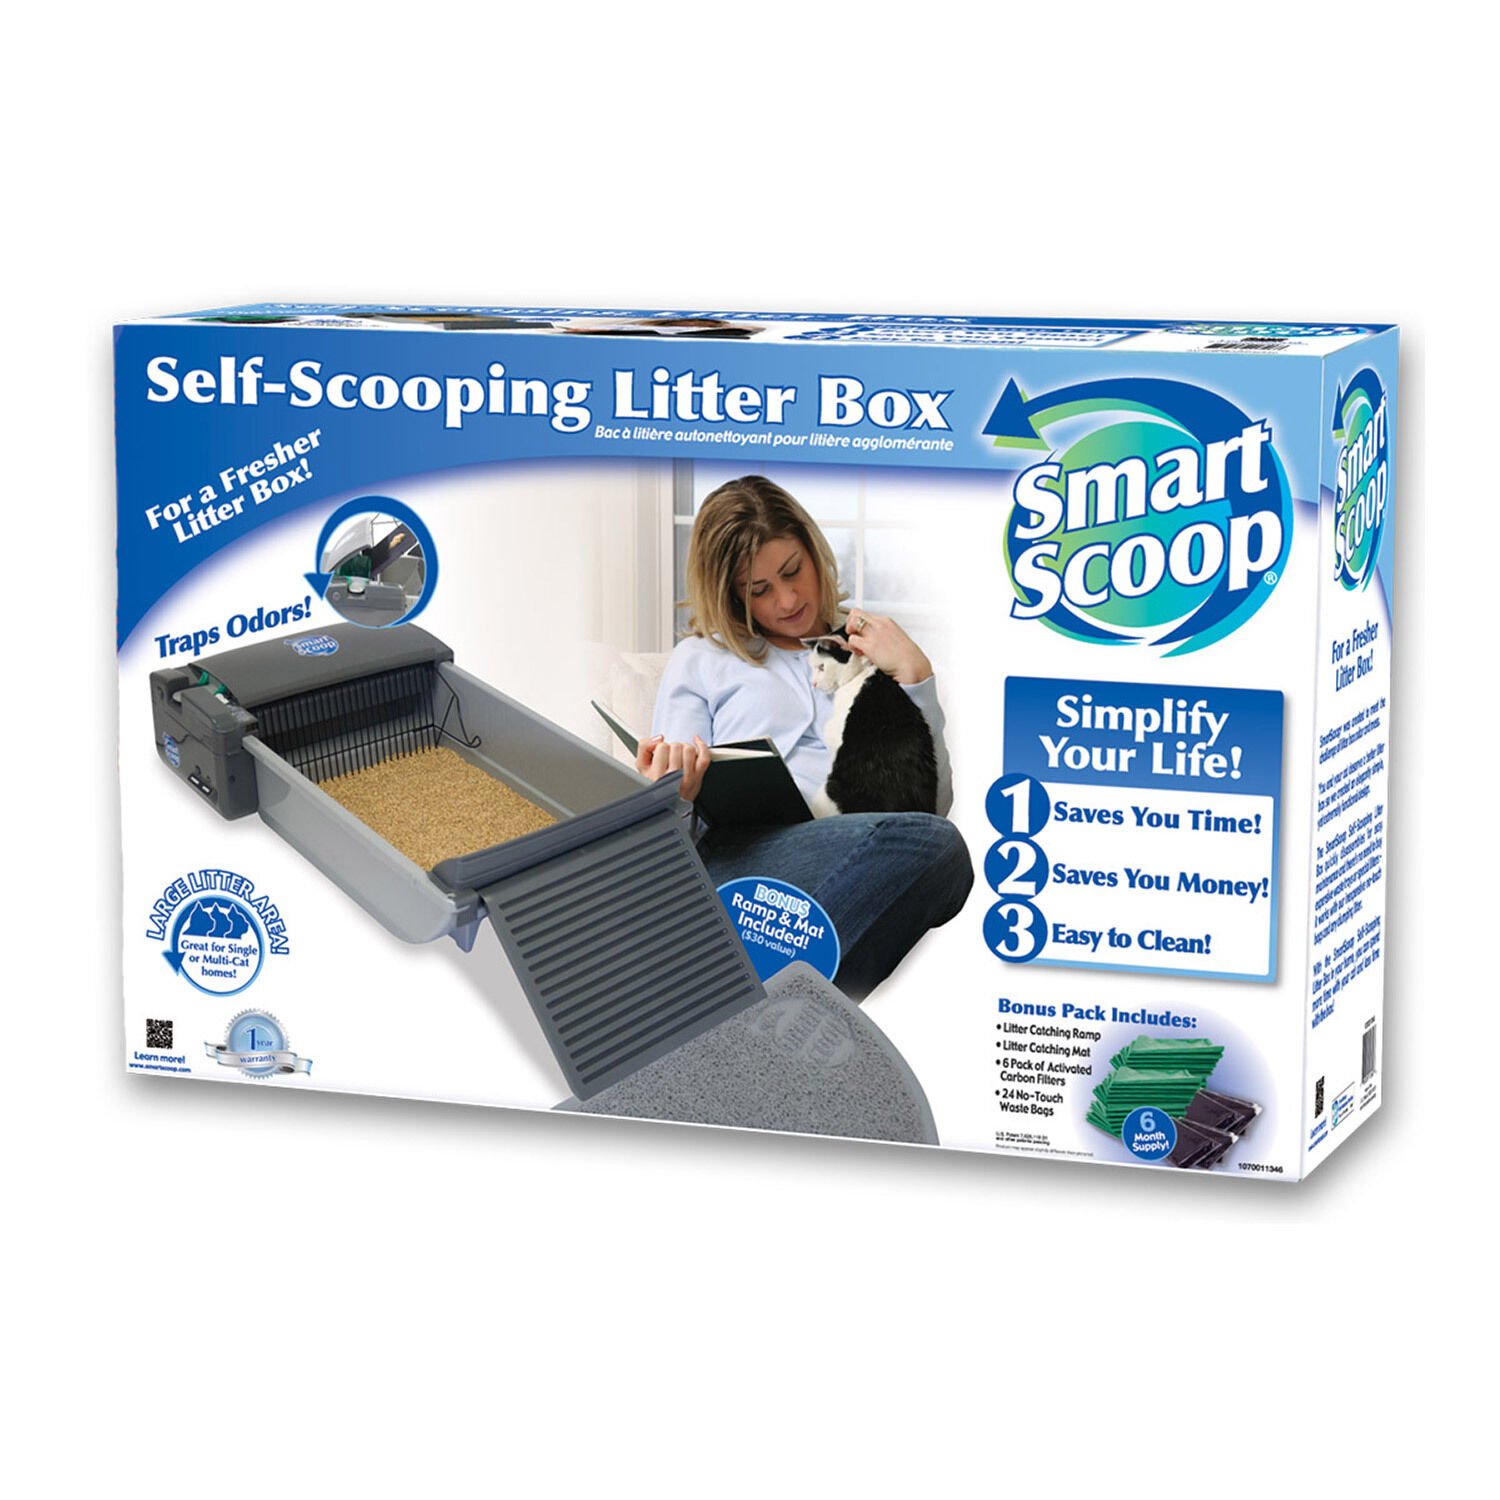 Smart Scoop Automatic Litter Box | 1ea STOP being penalized for  forgetting  to scoop, let SmartScoop do the dirty work for you. Your kitty will still love you and stop leaving surprises in random, unwanted places. The SmartScoop Self-Scooping Litter Box is an automatic litter box that scoops fifteen minutes after your cat leaves the box. Plug it in and let it scoop. Easy peasy. Oh, and it eliminates odor, too! Size: 25.5  x 16.8  x 7.5  | Smart Scoop Automatic Litter Box | 1ea